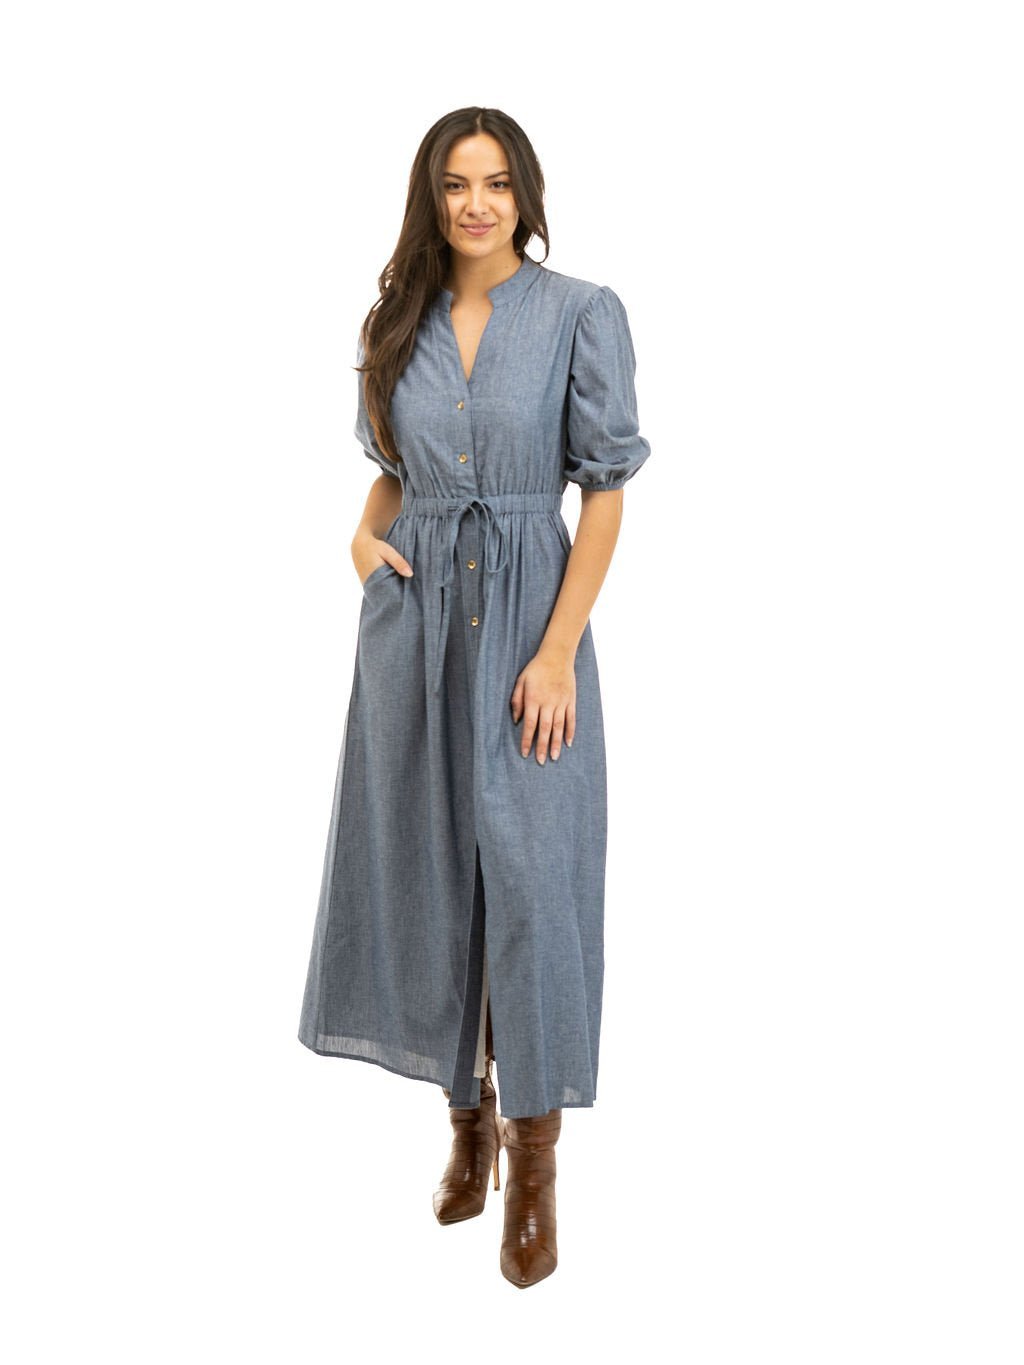 Beau & Ro Dress The Lily Flutter Maxi Dress | Chambray